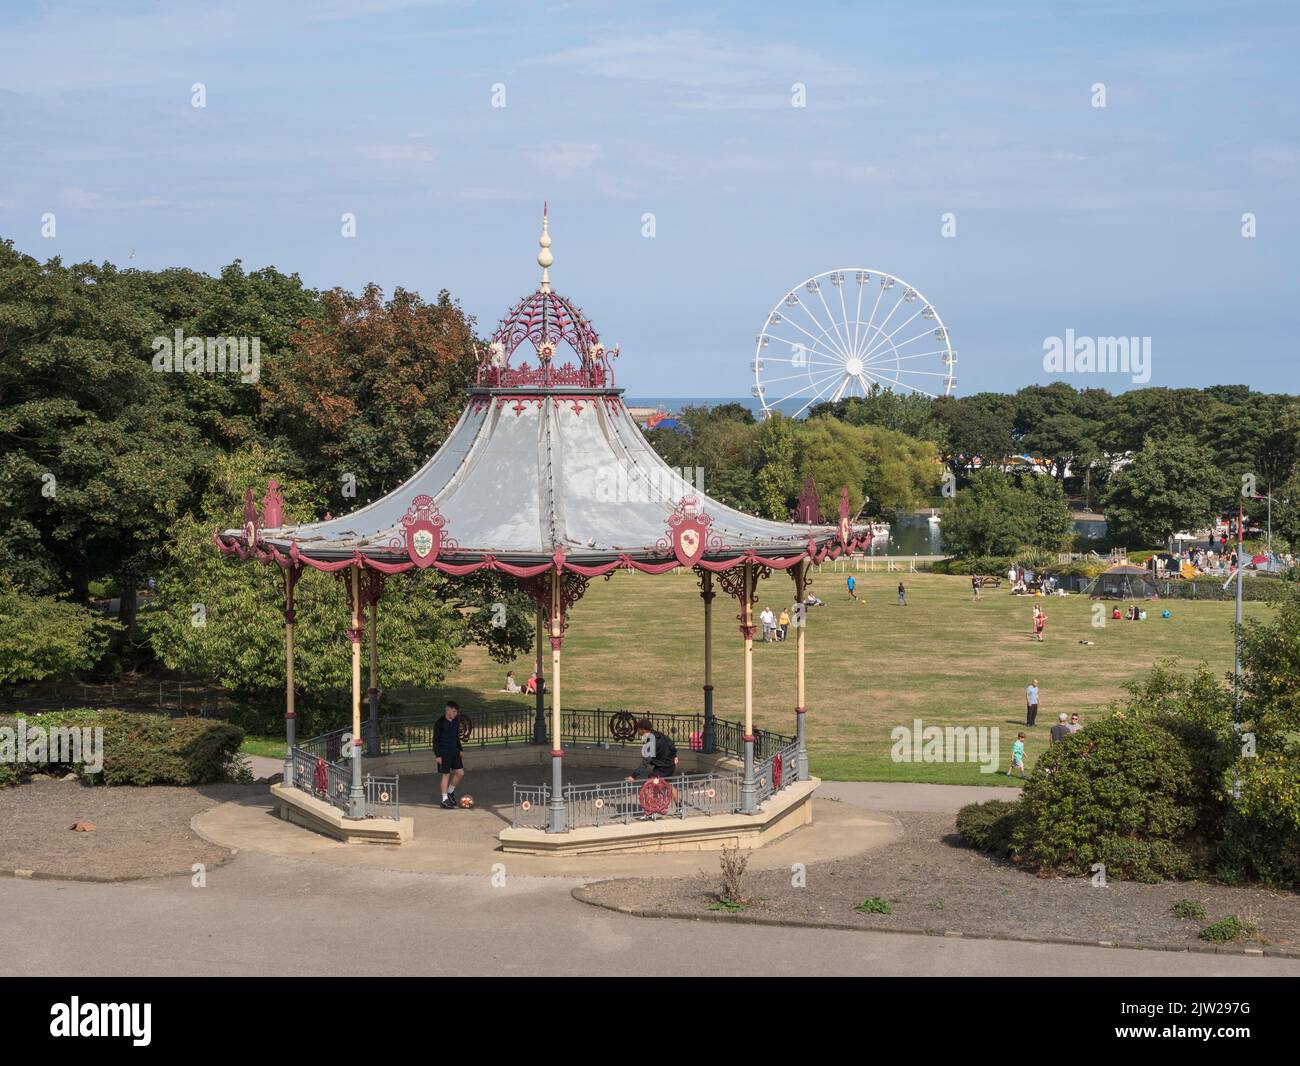 The Bandstand in South Shields South Marine Park with the seaside Ferris wheel in the background, England, UK Stock Photo